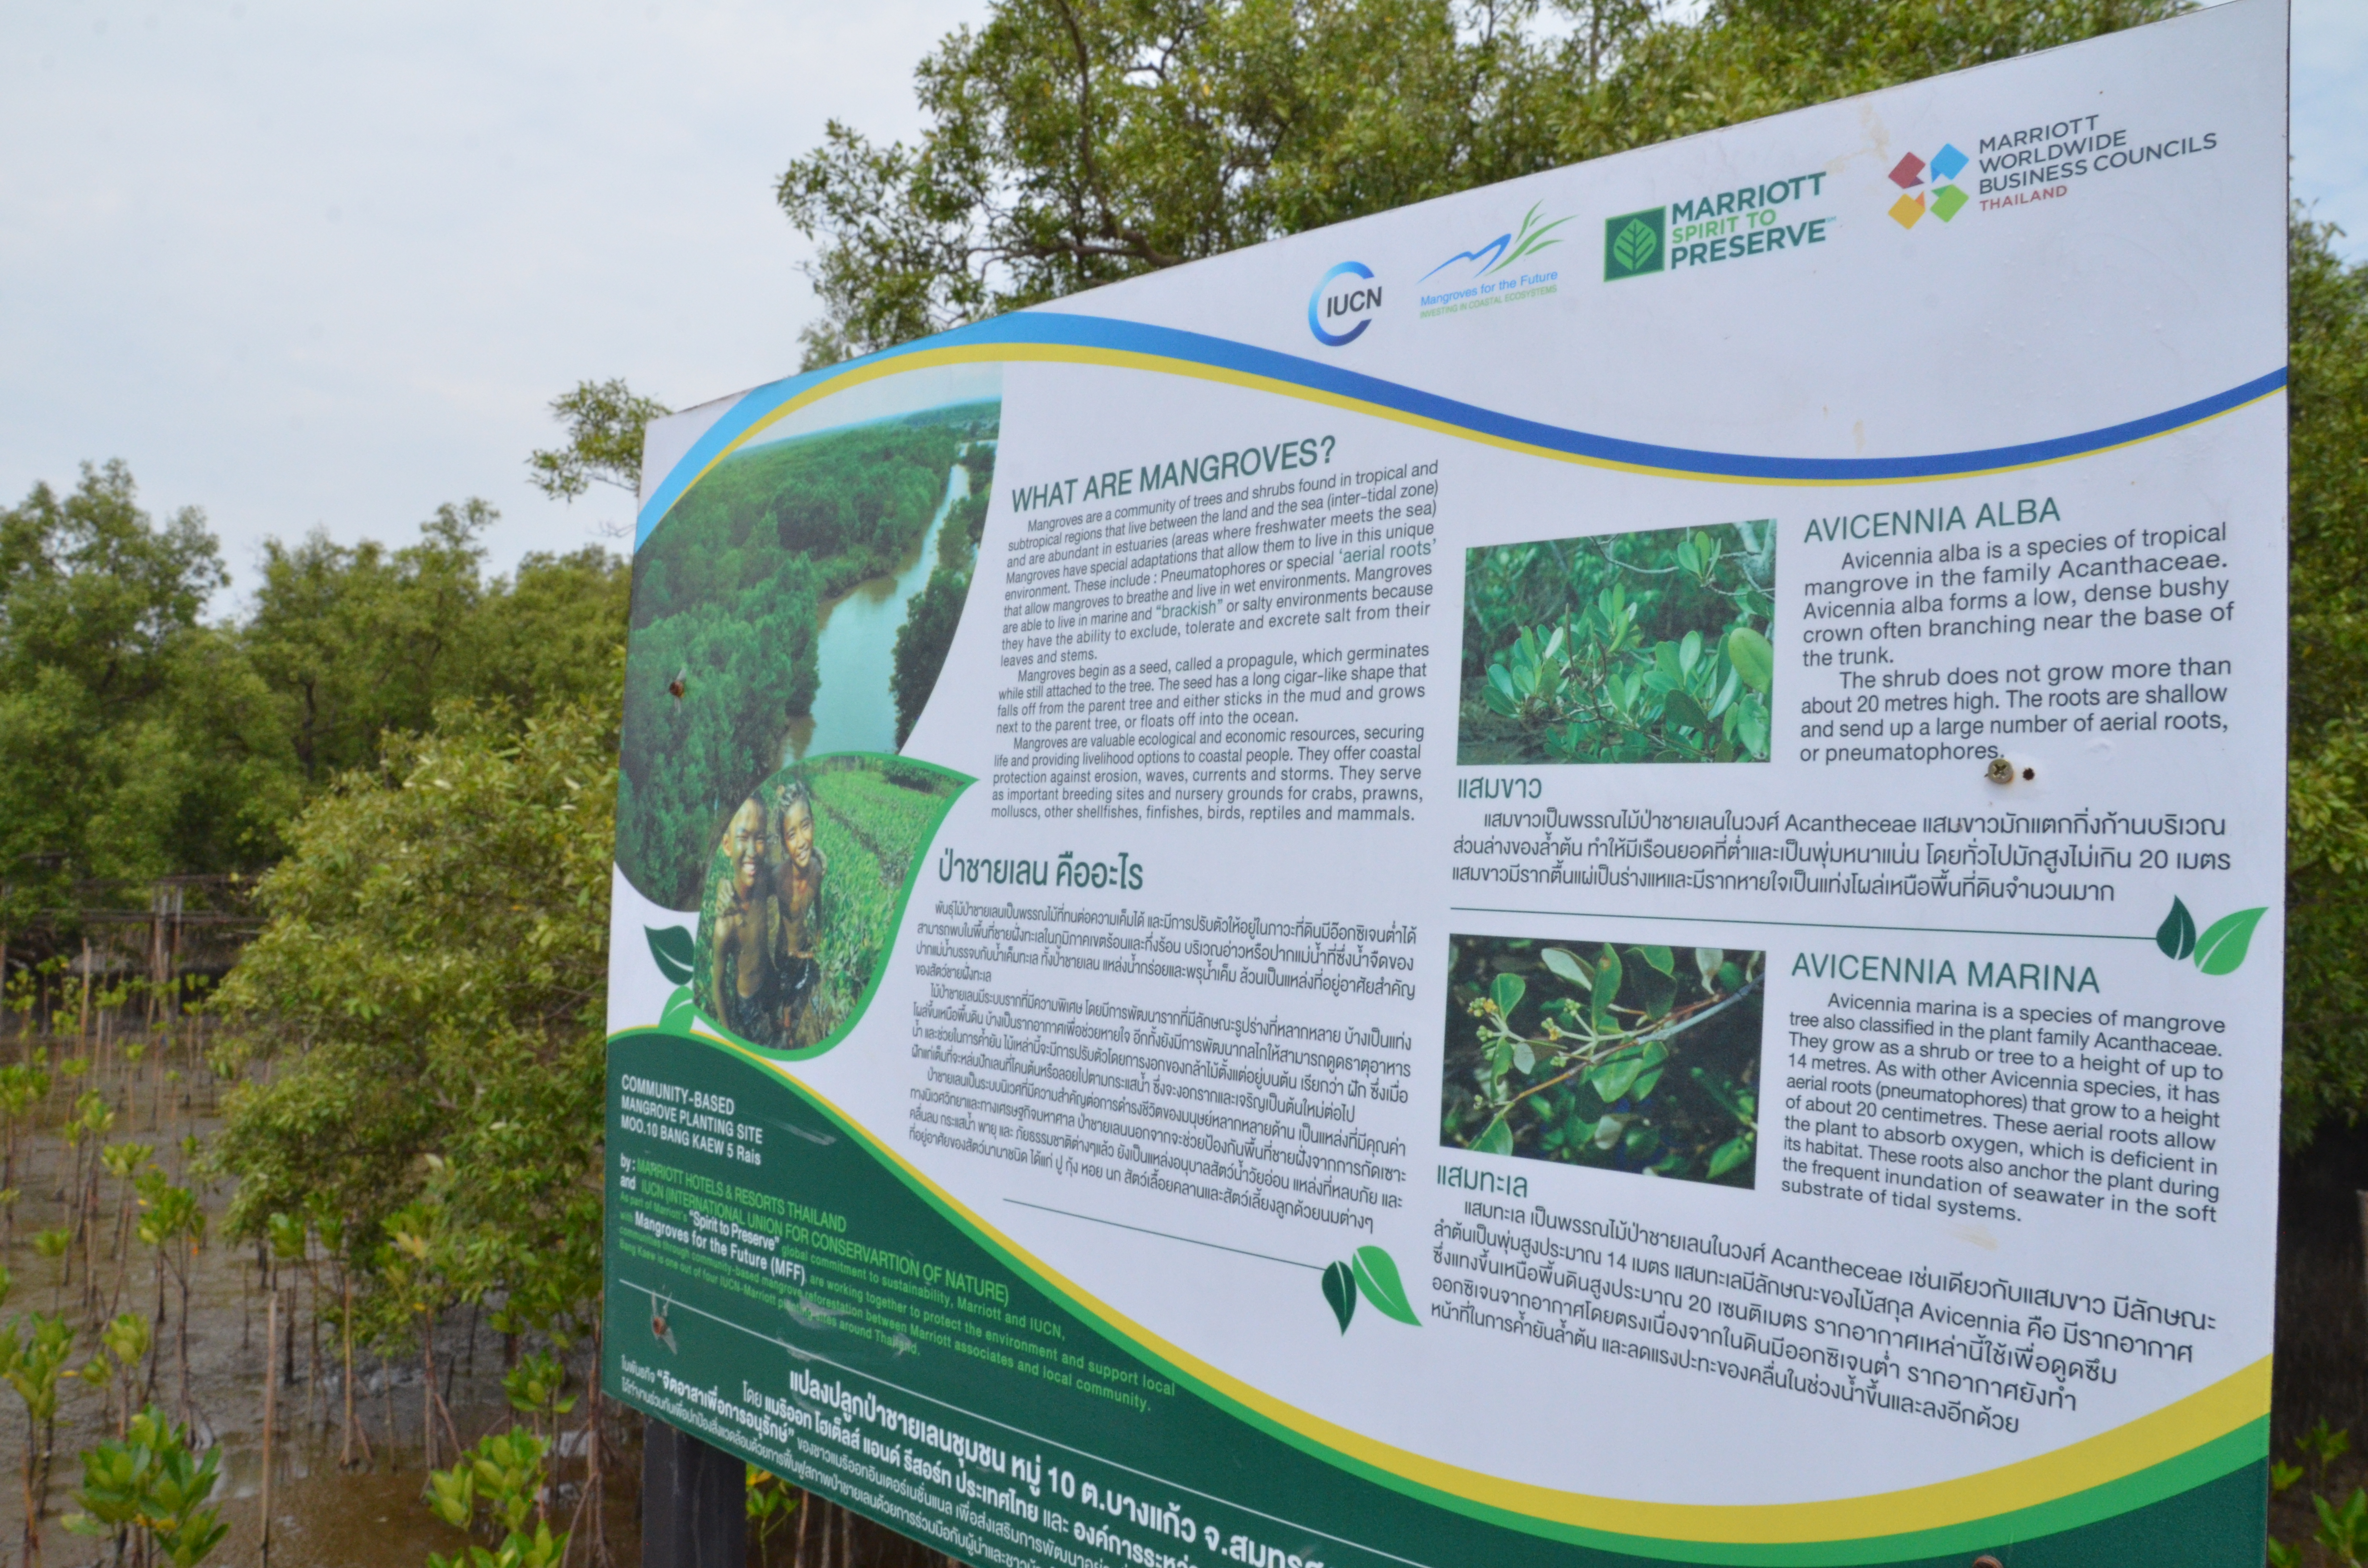 A signboard with information on mangroves and the IUCN, MFF, and Marriott logos